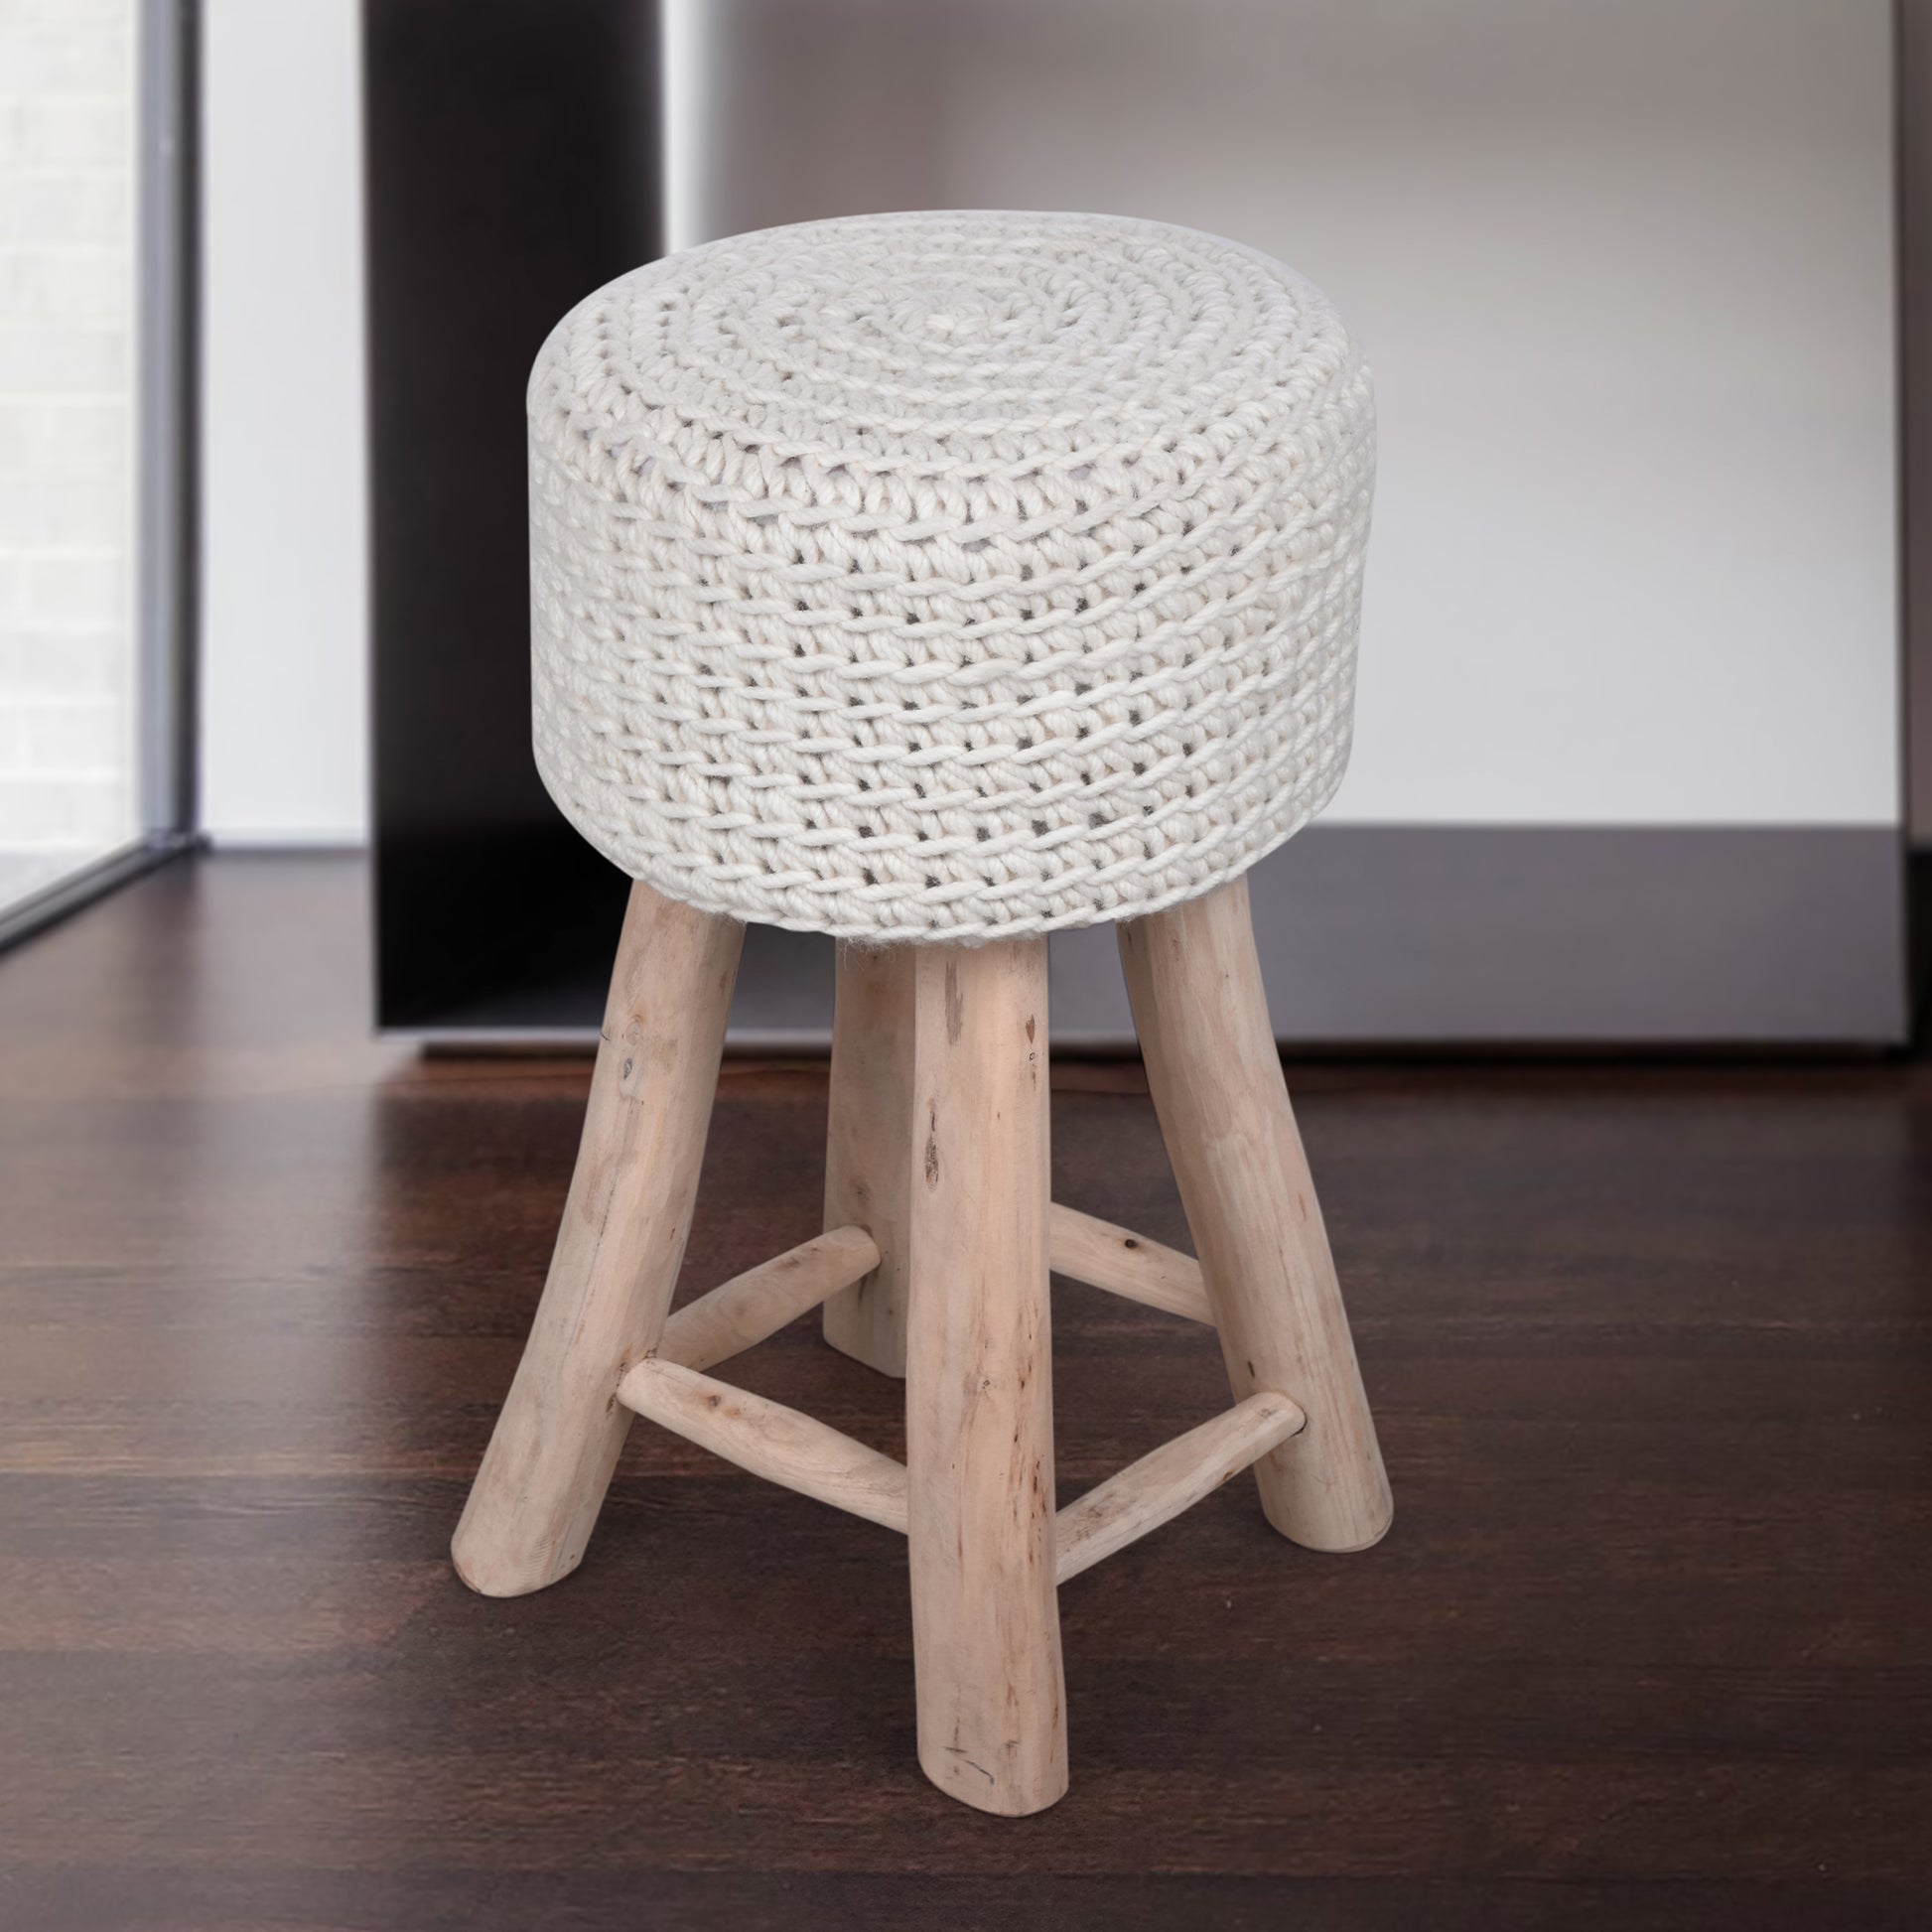 Montana Bar Stool, 40x40x70 cm, Natural White, Wool, Hand Knitted, Hm Knitted, Flat Weave